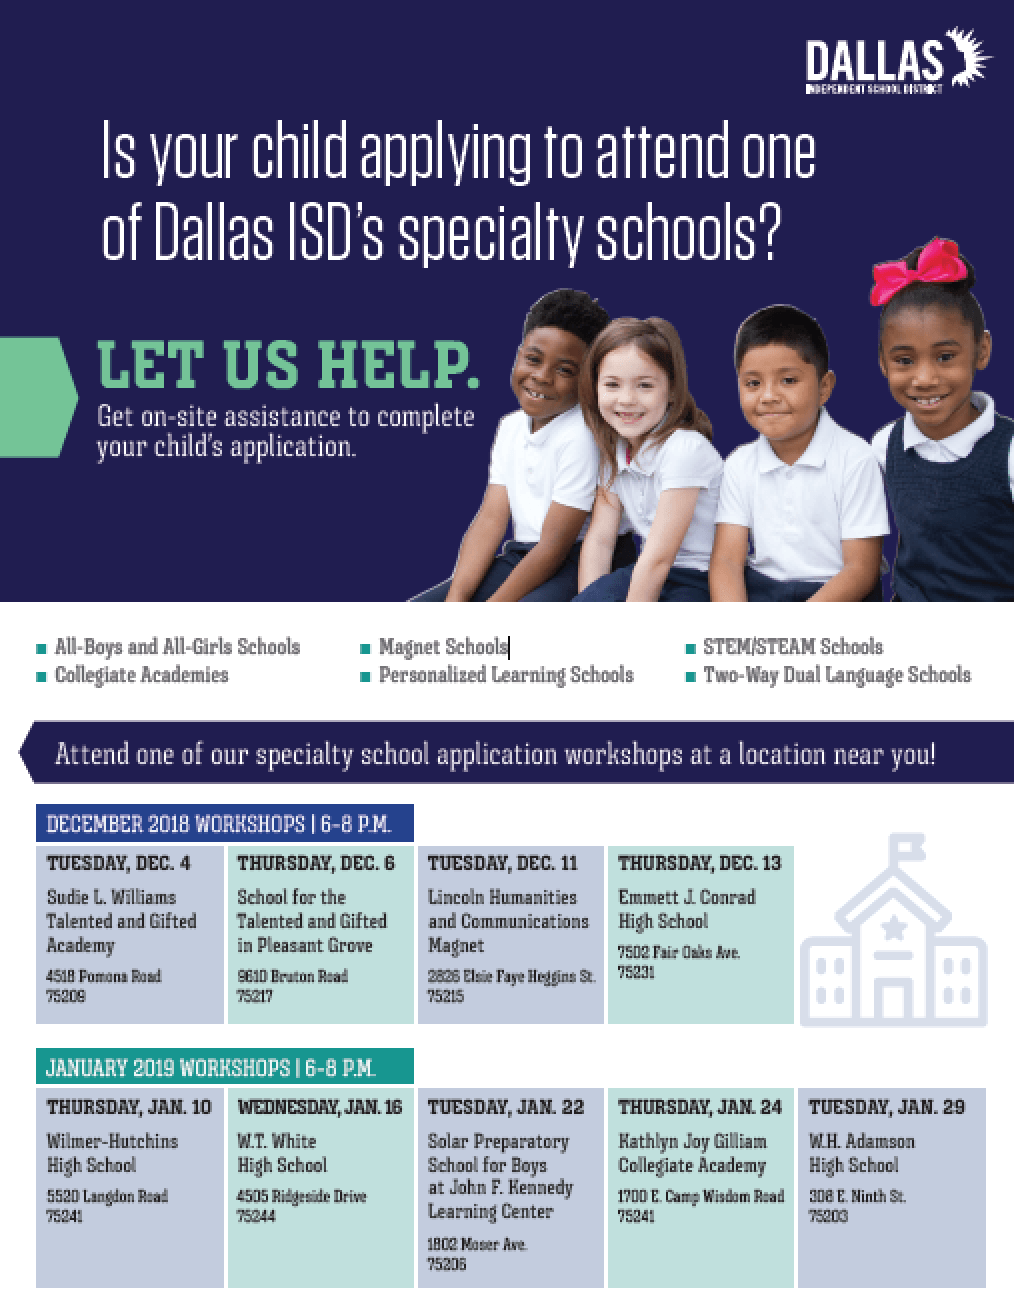 Is your child applying to one of Dallas ISD’s specialty schools? Let us help